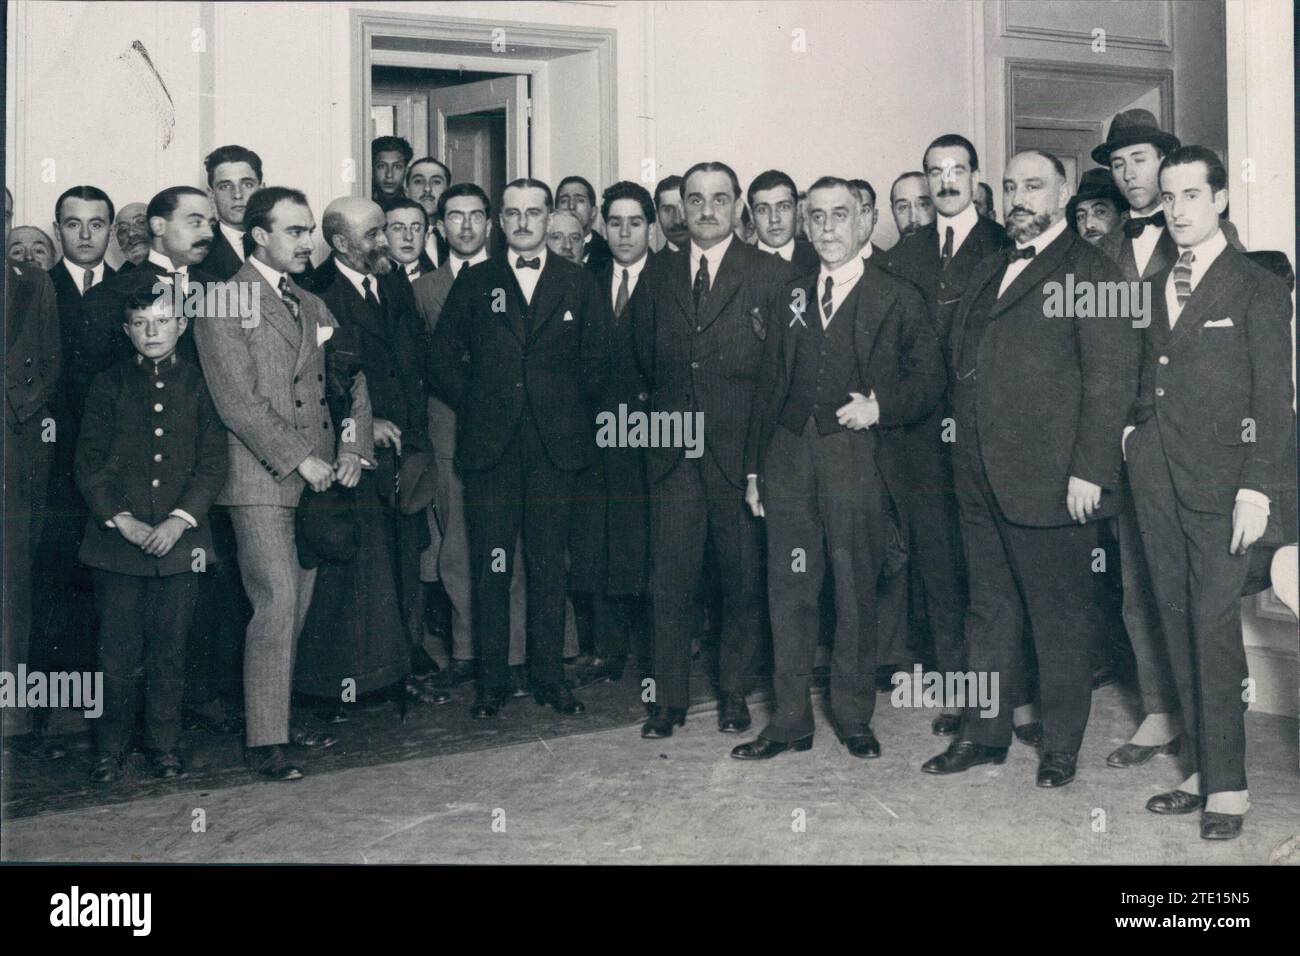 10/31/1919. Madrid. At the Ritz hotel. Mr. César Silio (X) after the conference he gave on University autonomy. Credit: Album / Archivo ABC / Julio Duque Stock Photo